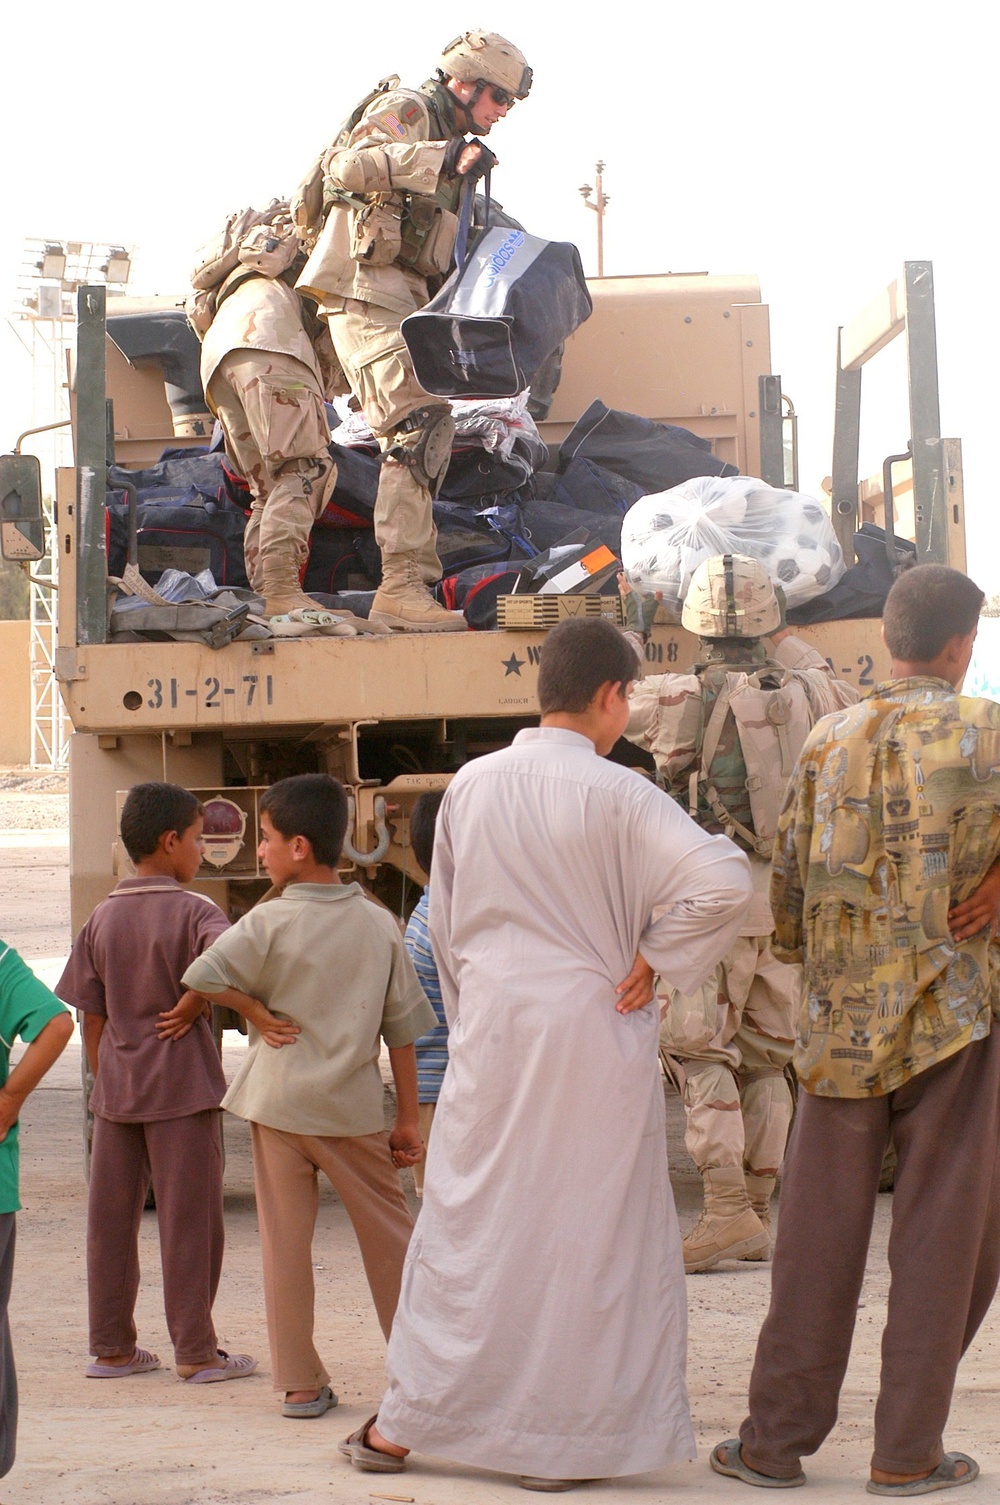 Soldiers unload soccer (football) uniforms and equipment